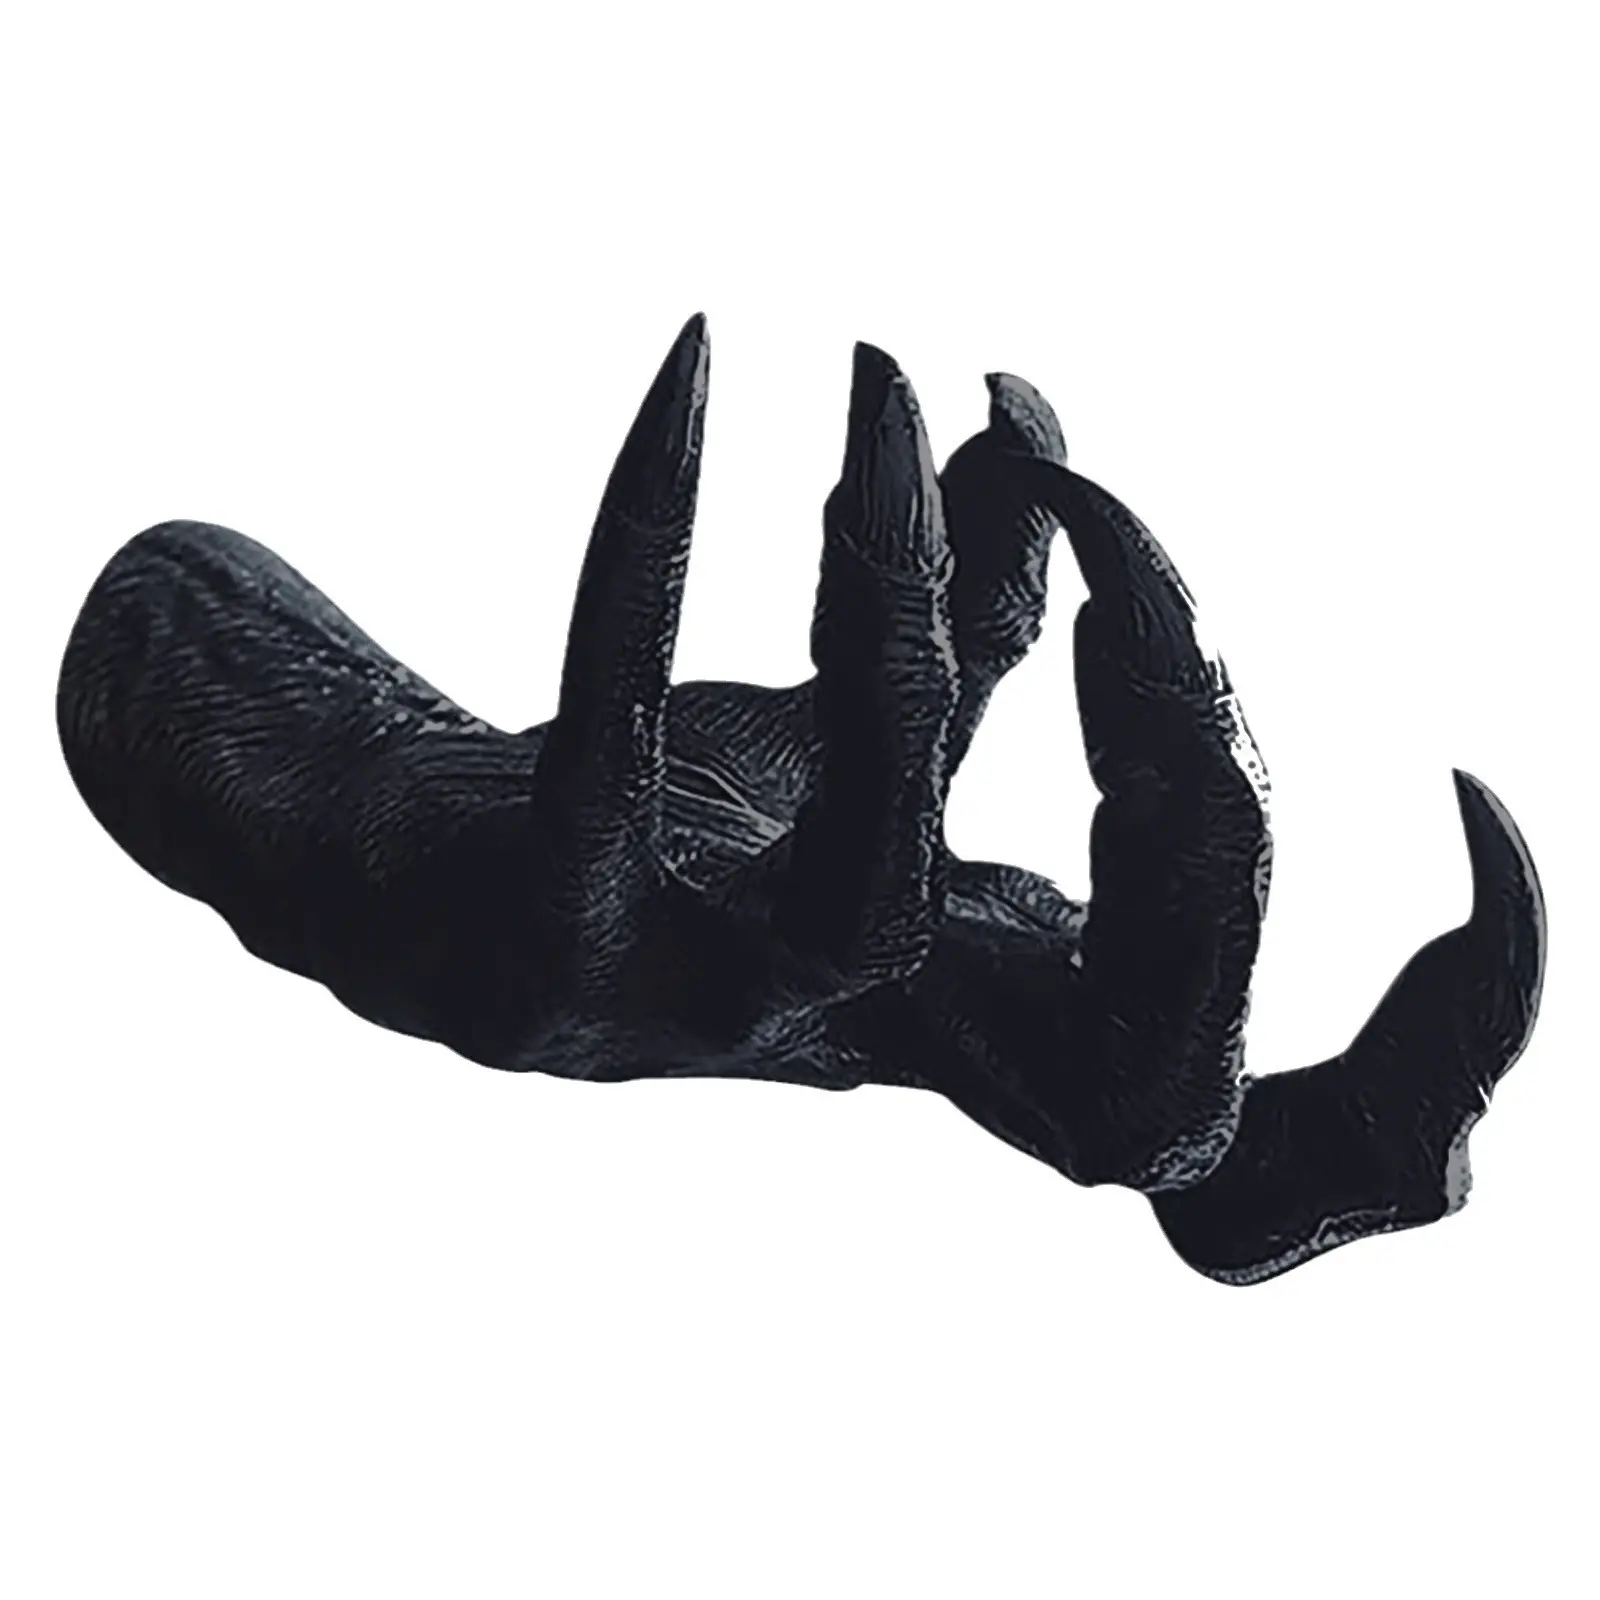 Witch's Hand Wall Hanging Wallmounted Simulation Resin Statue 3d Decorative Art Open Hand Statue Home Decoration Sculpture